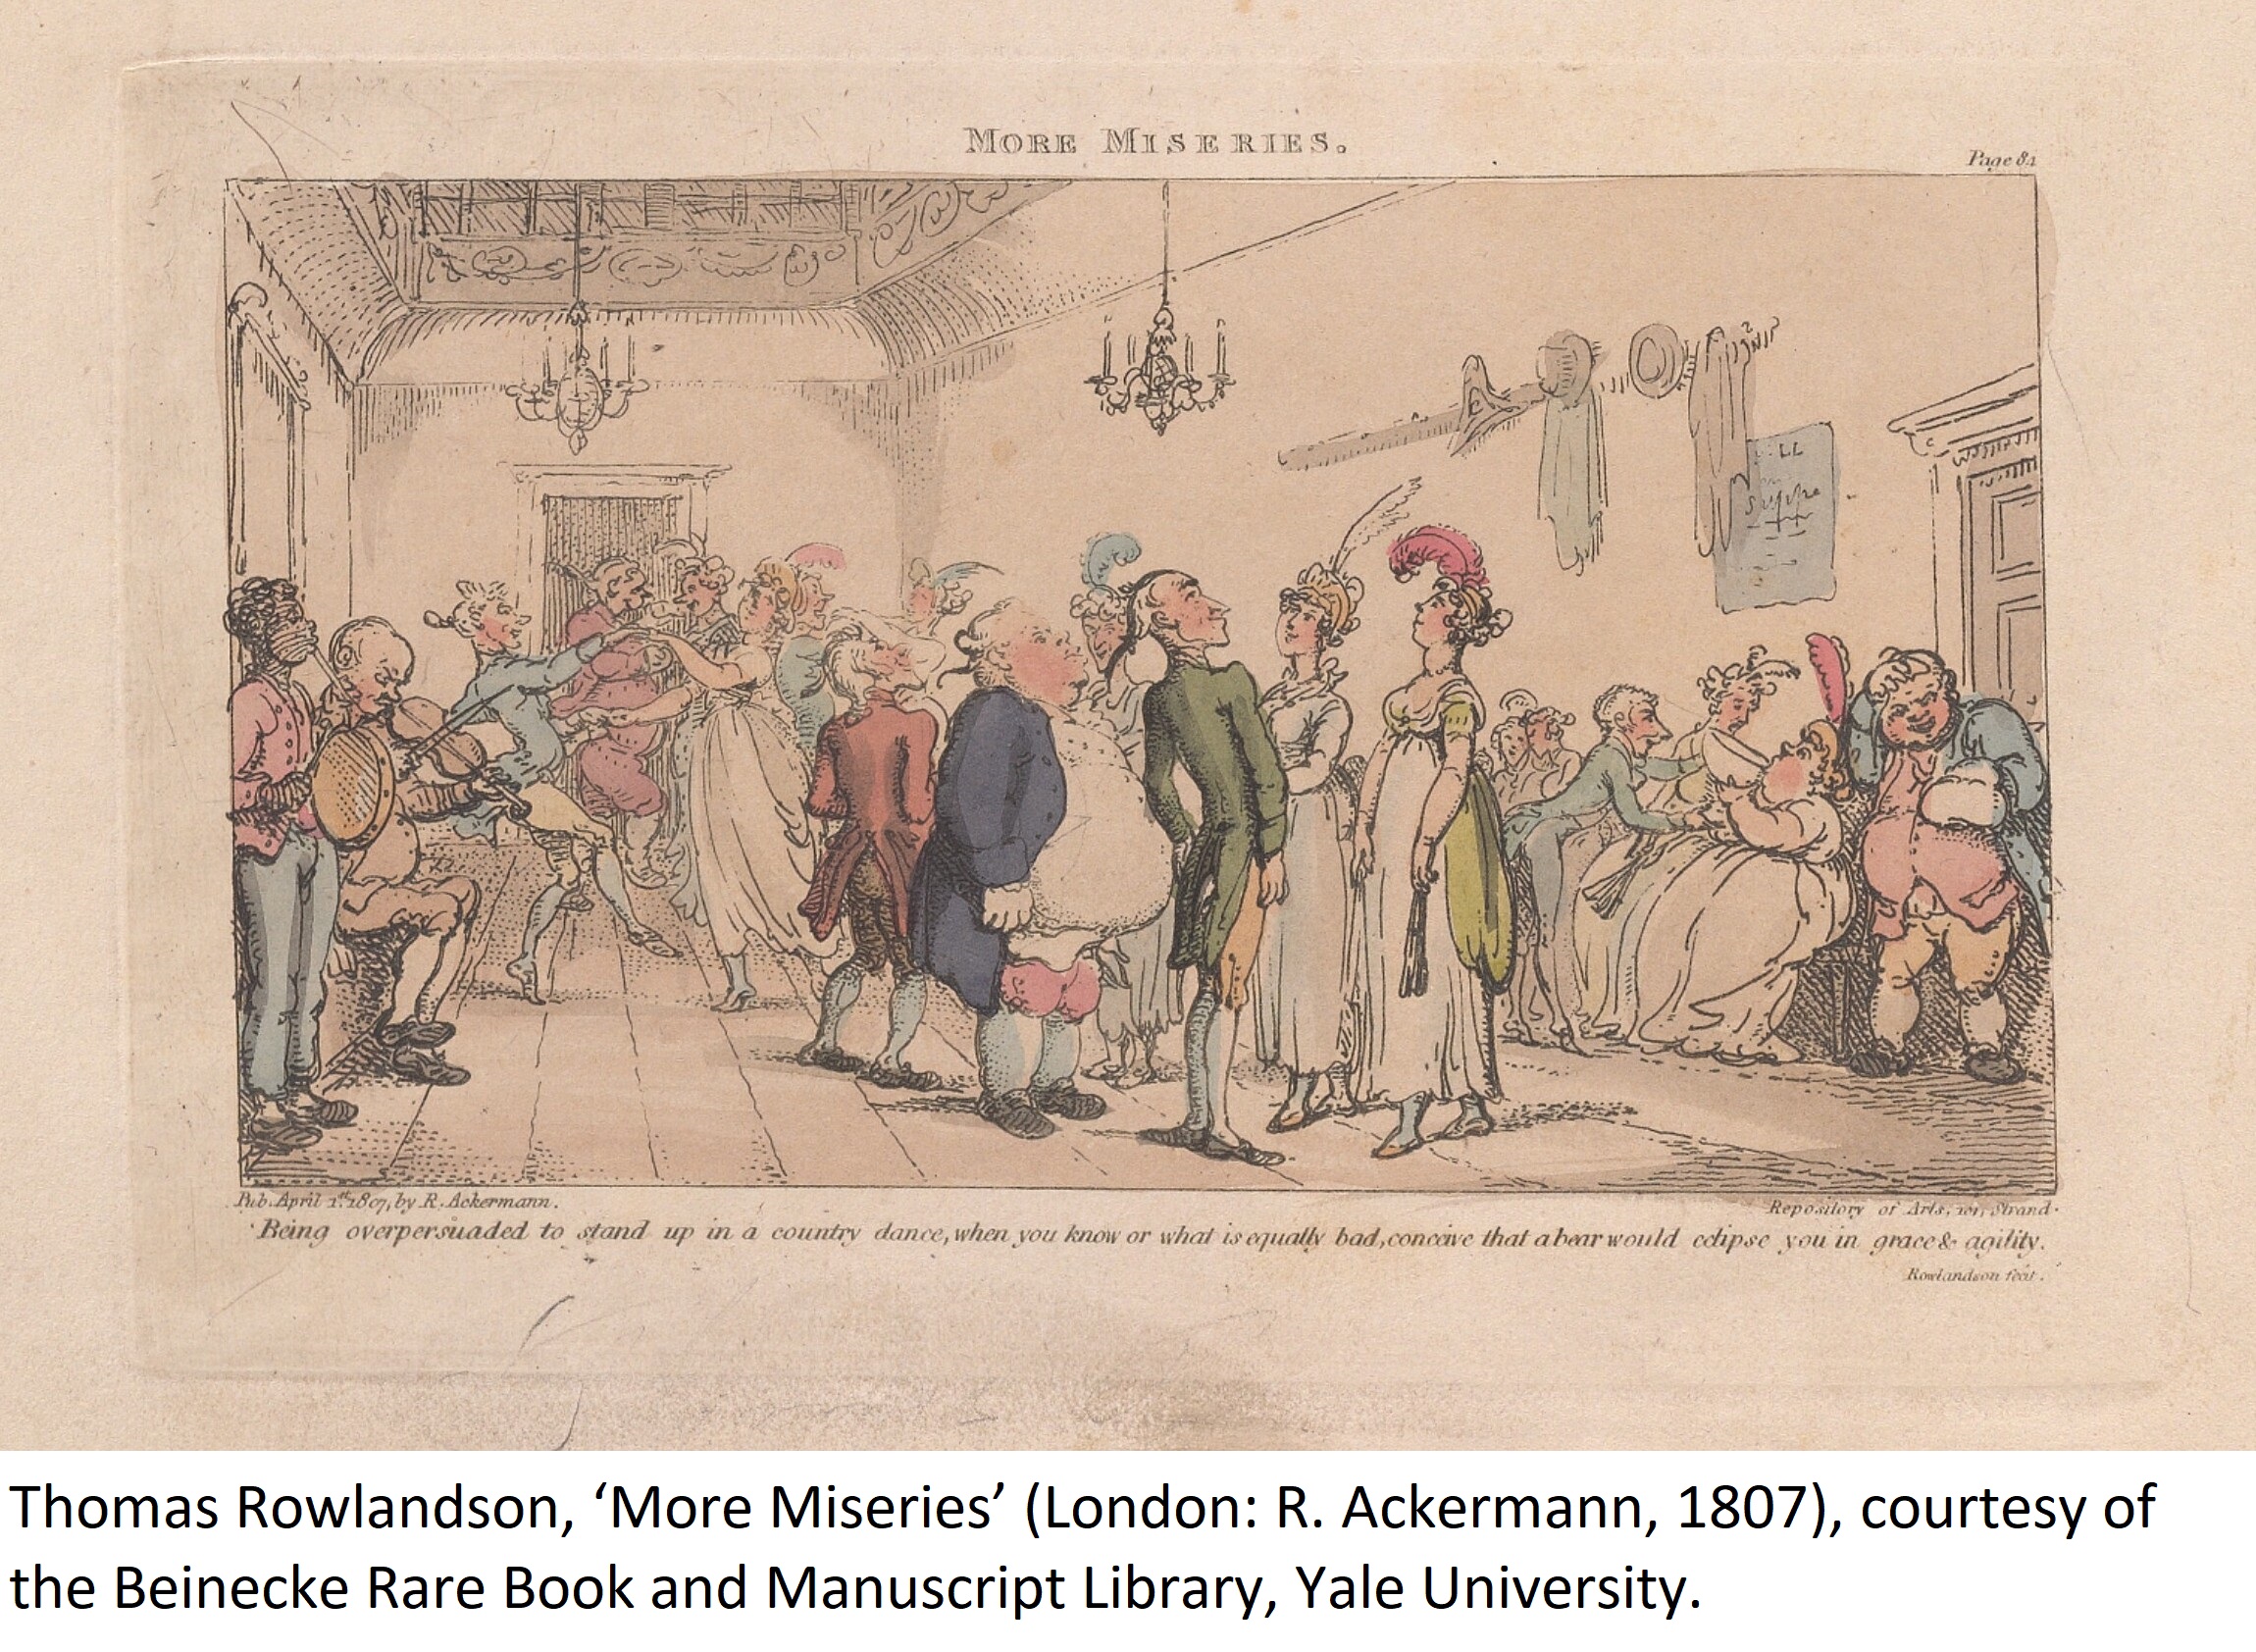 Thomas Rowlandson, ‘More Miseries’ (London: R. Ackermann, 1807), courtesy of the Beinecke Rare Book and Manuscript Library, Yale University.